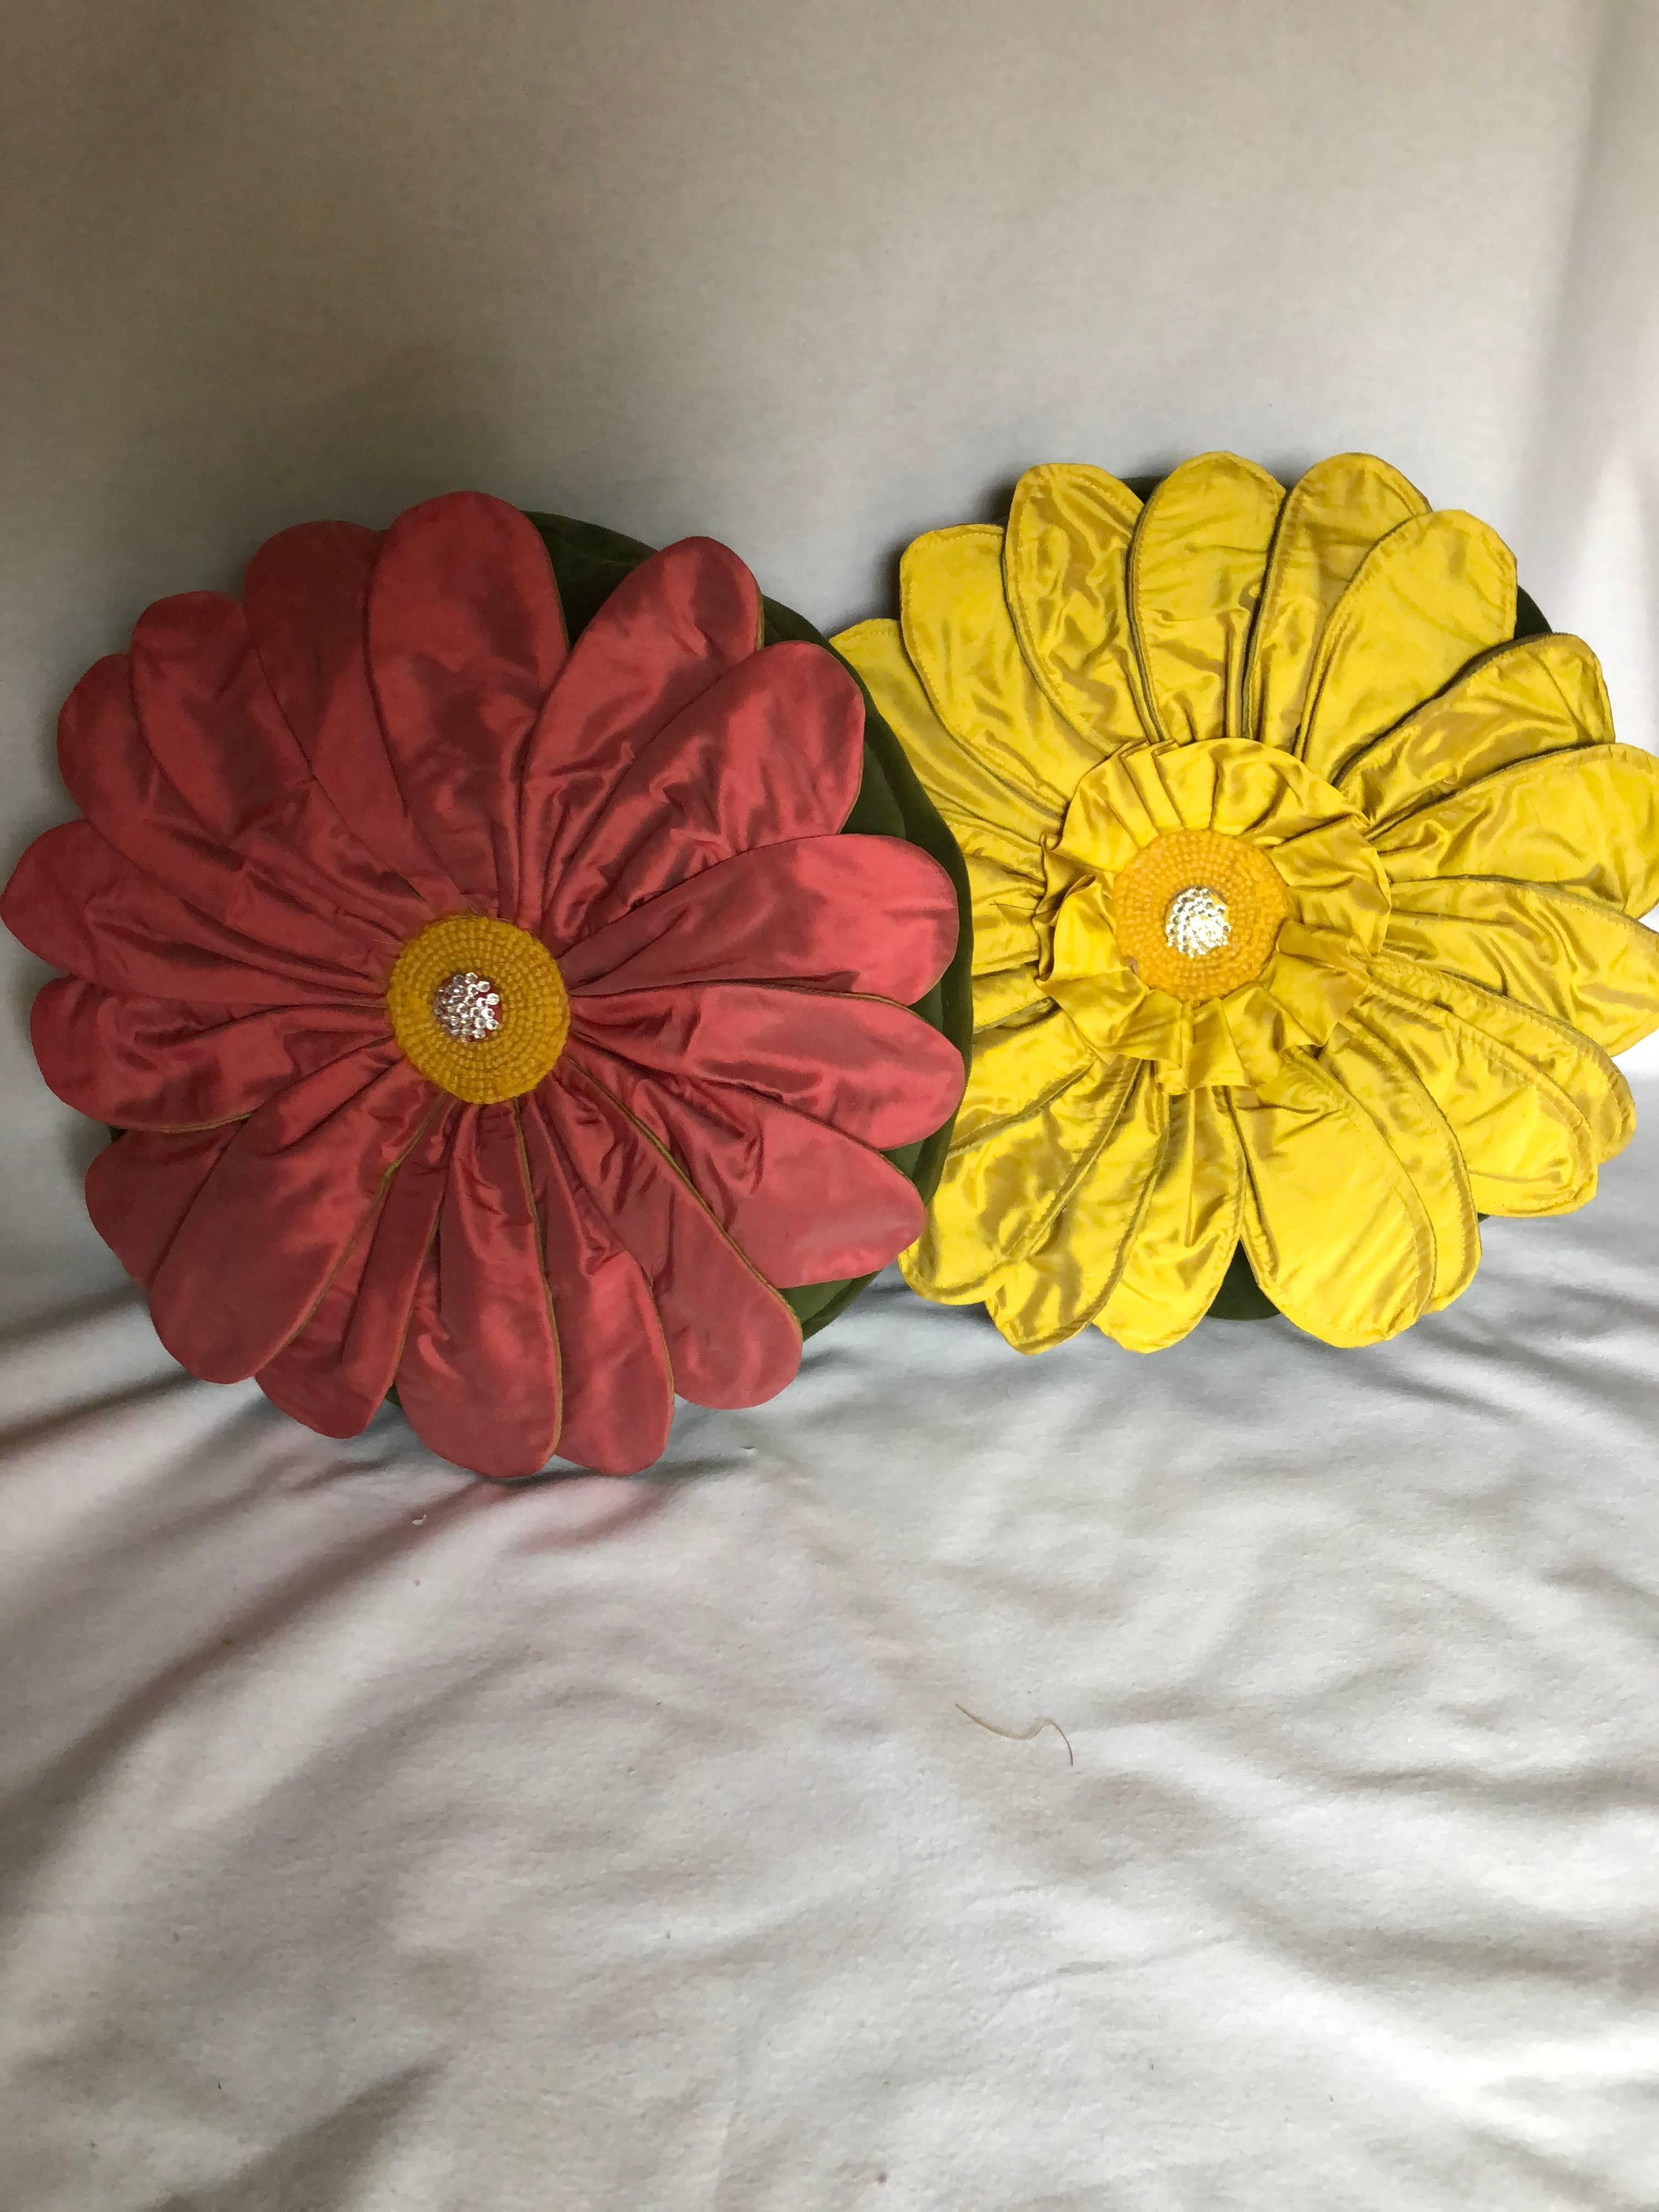 American Gerber Daisy Throw Pillow, Unusual Original Design, Signed Limited Ed. Pillow For Sale